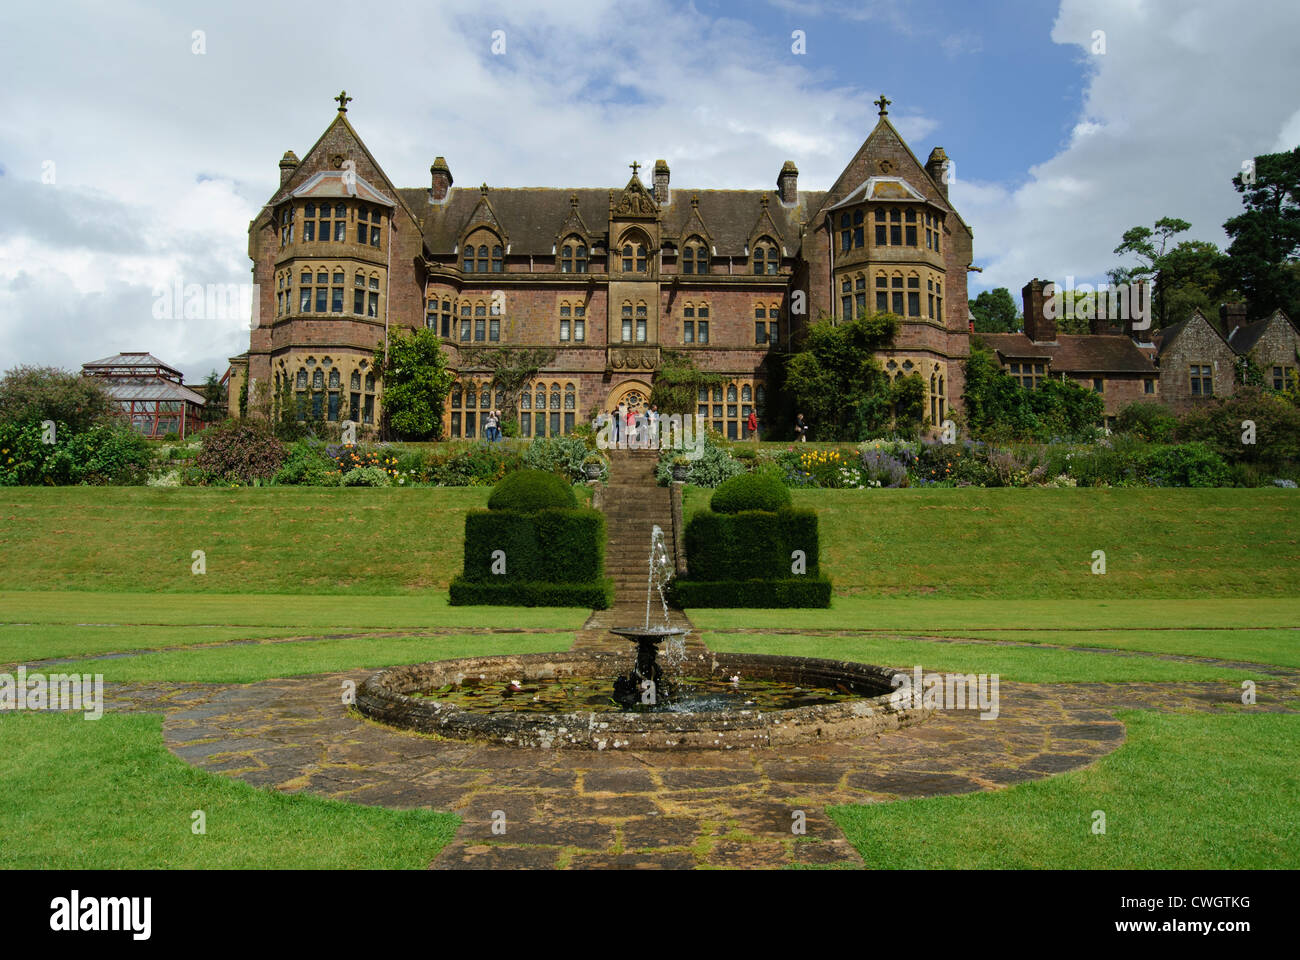 Knightshayes Court and garden, near Tiverton in Devon. Victorian country house with richly decorated interiors and garden. Stock Photo